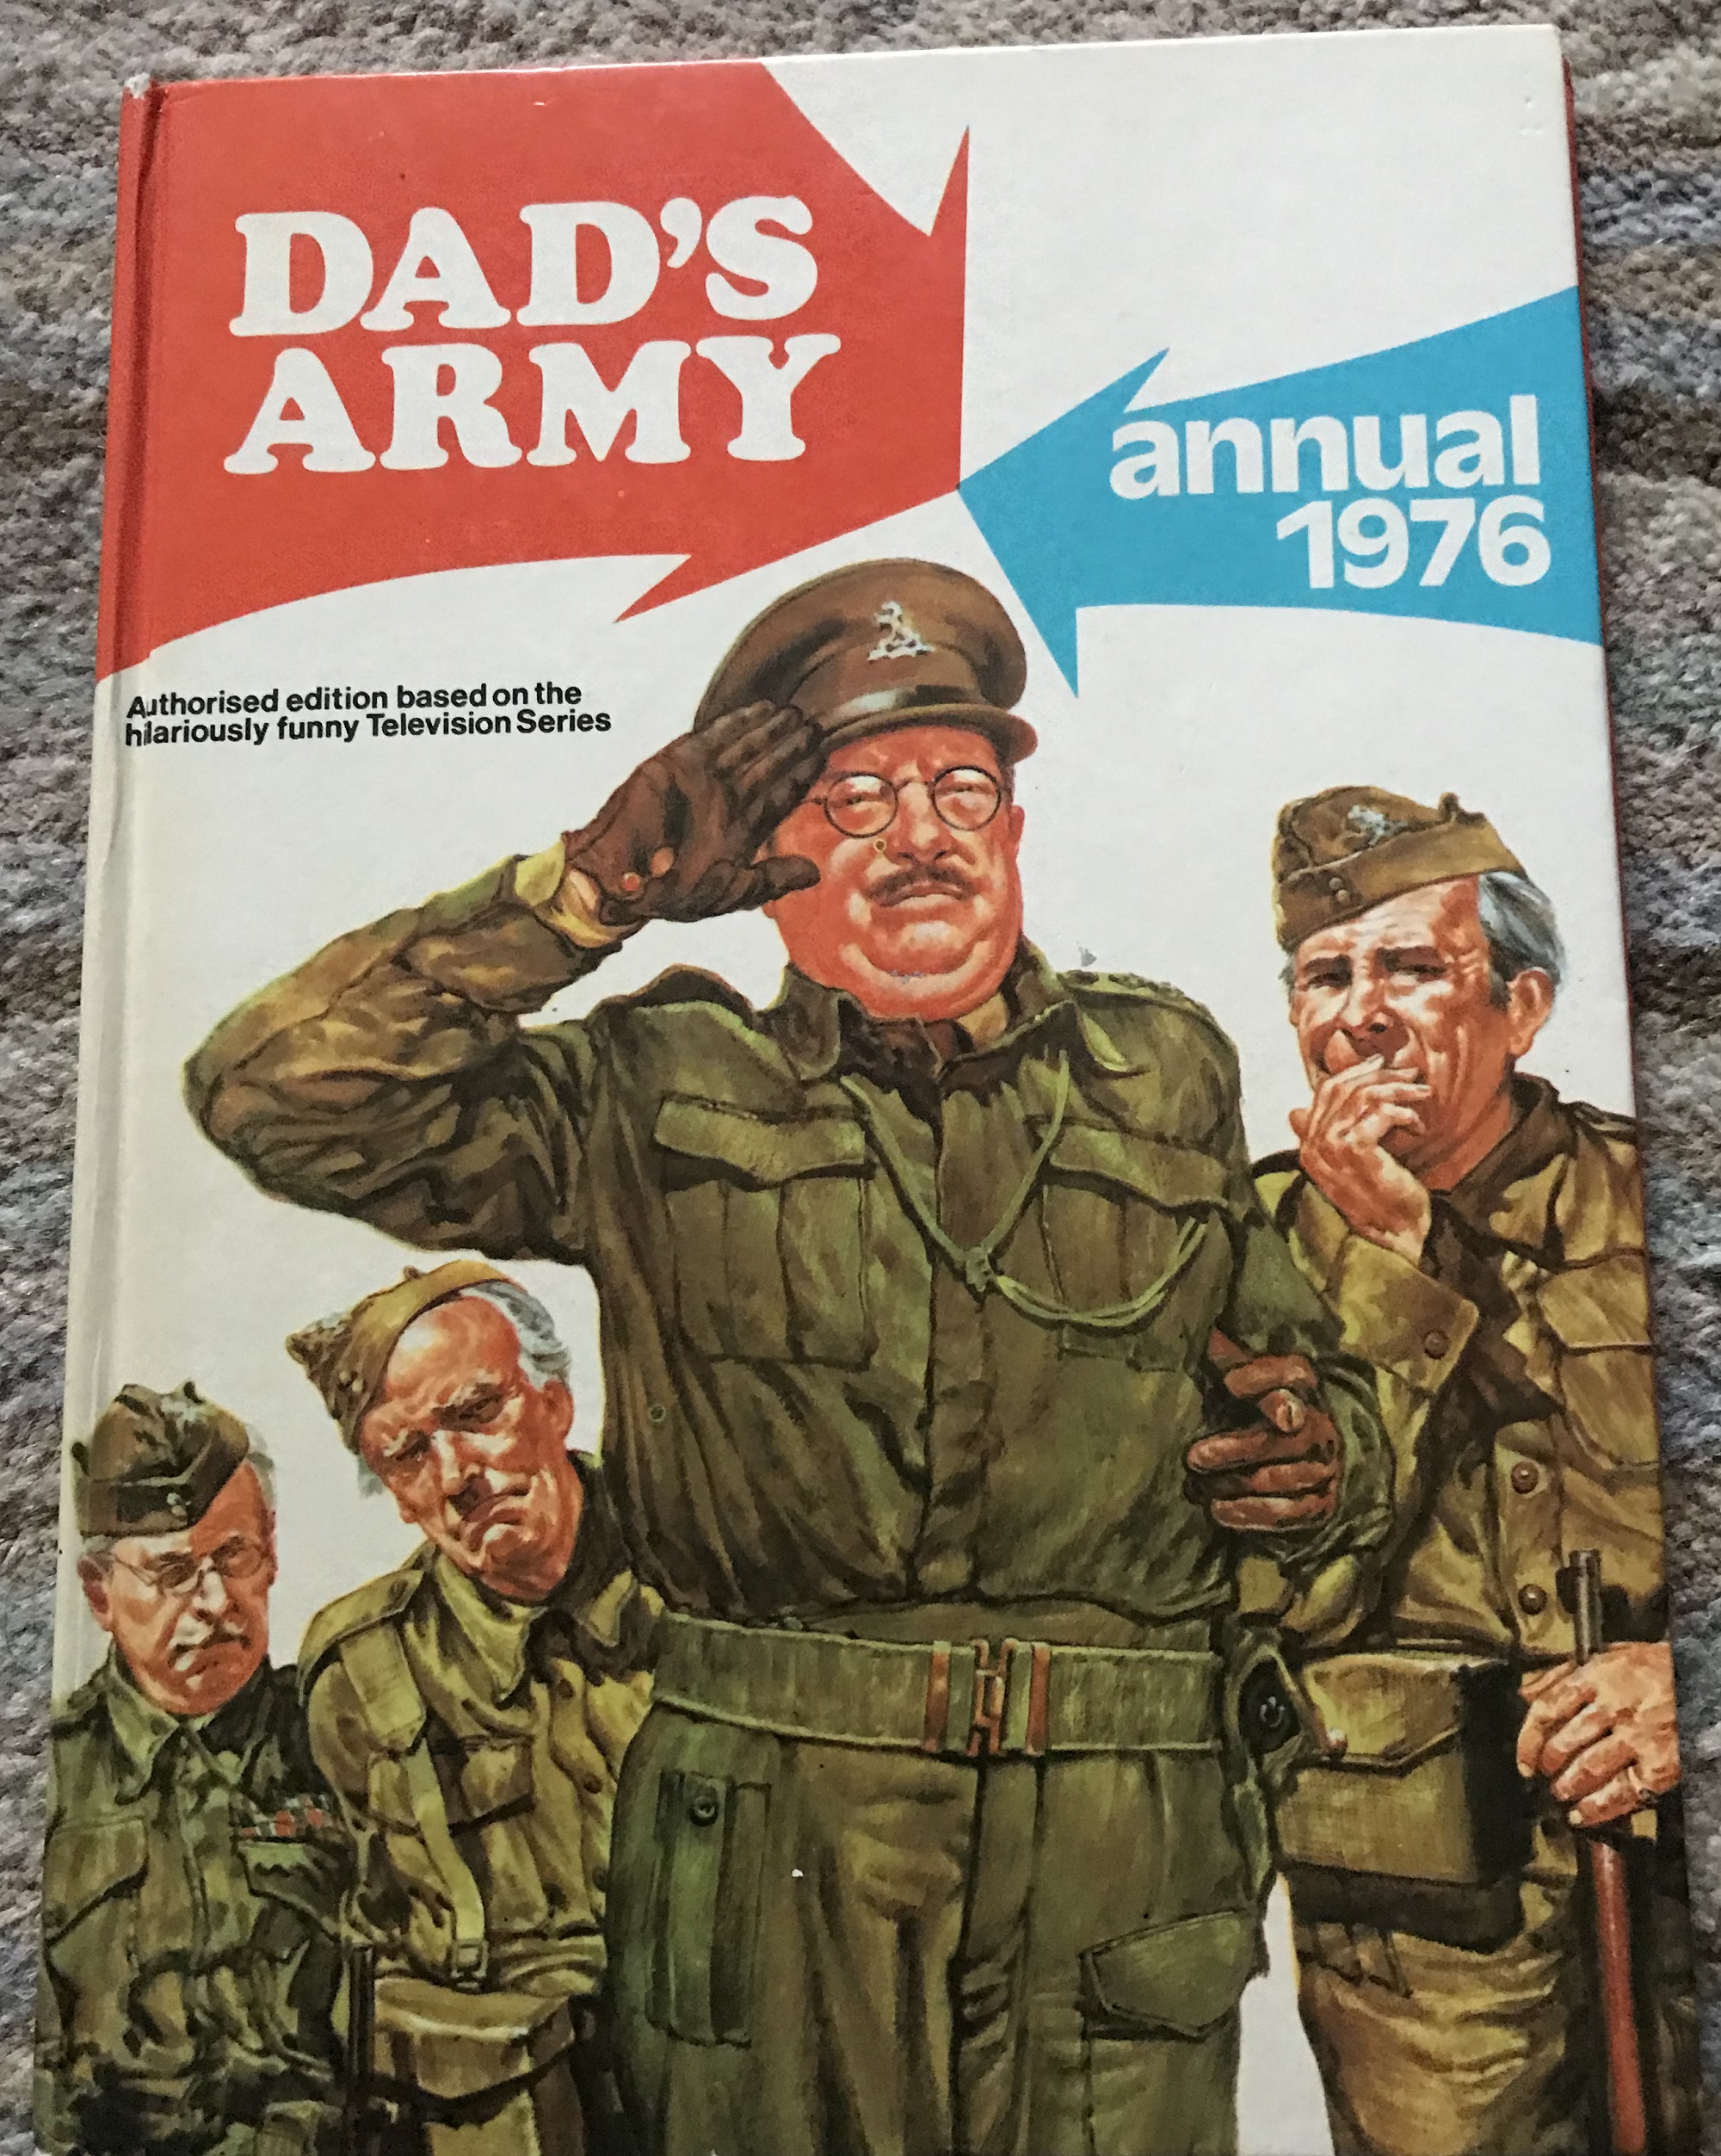 Dads Army multiple signed 1976 annual. Inside page has 11 autographs inc Arthur Lowe, Clive Dunn. - Image 3 of 3